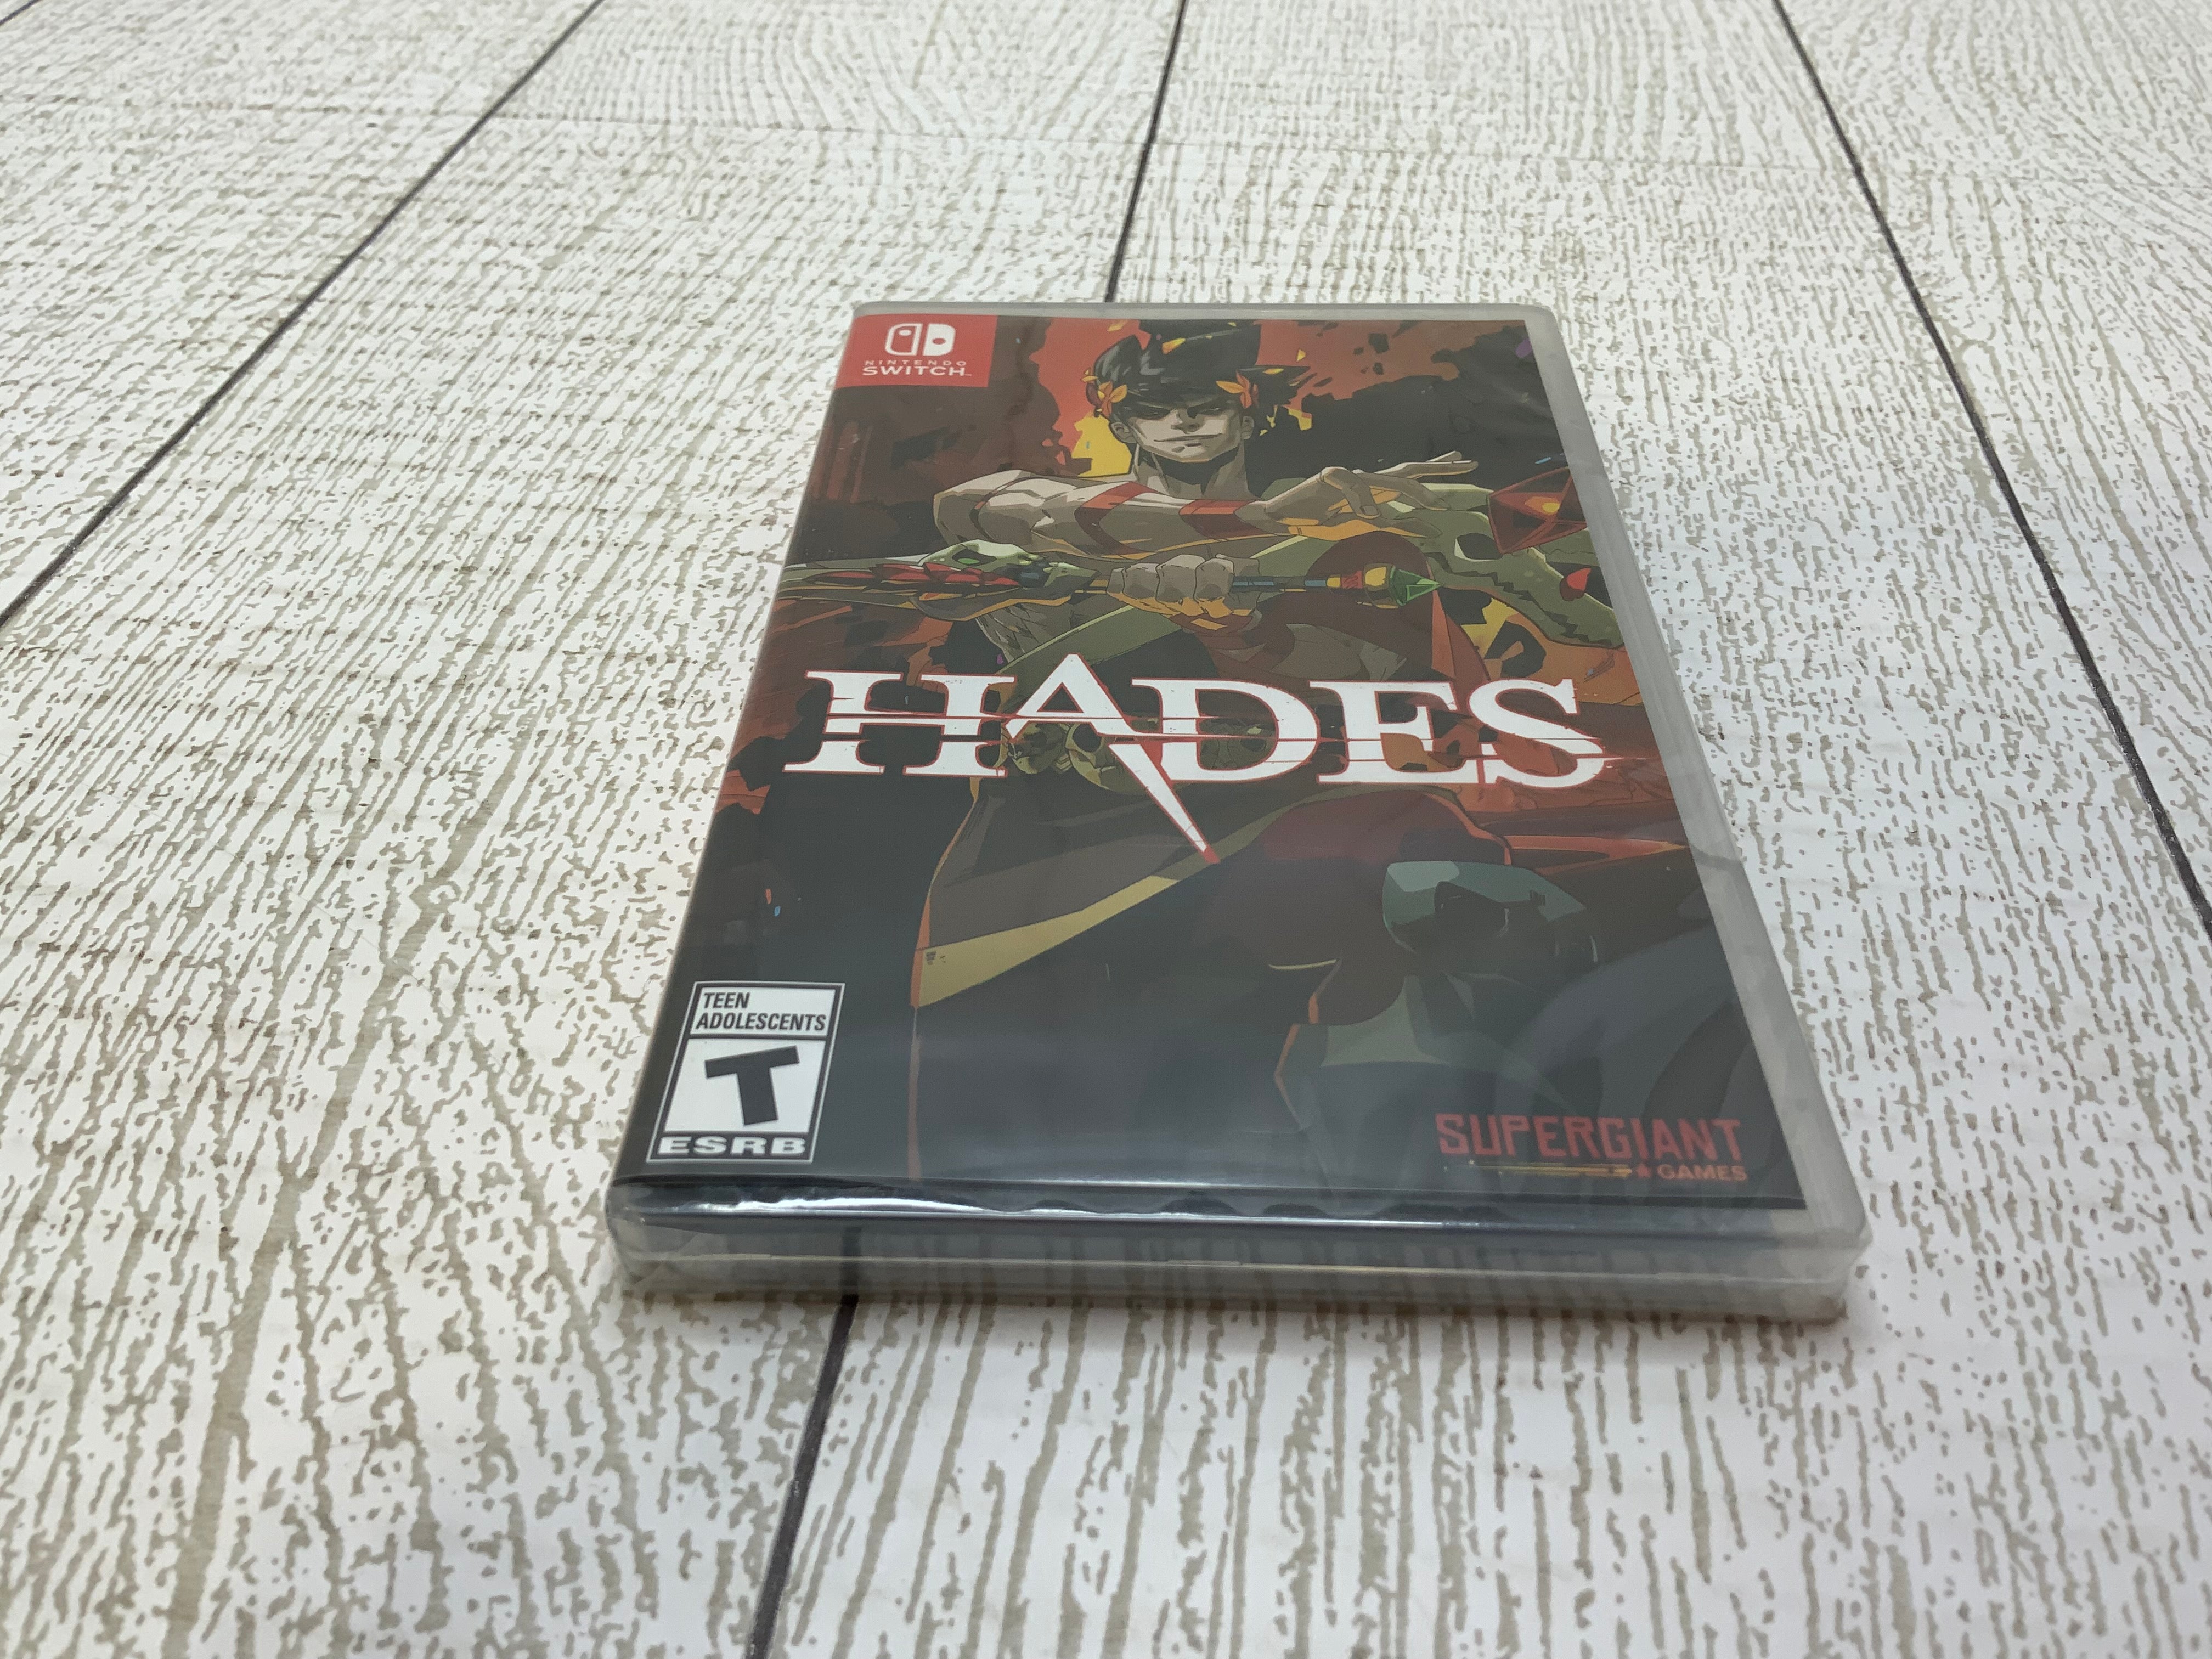 HADES - Nintendo Switch - Brand New (Factory Sealed) (7943946305774)